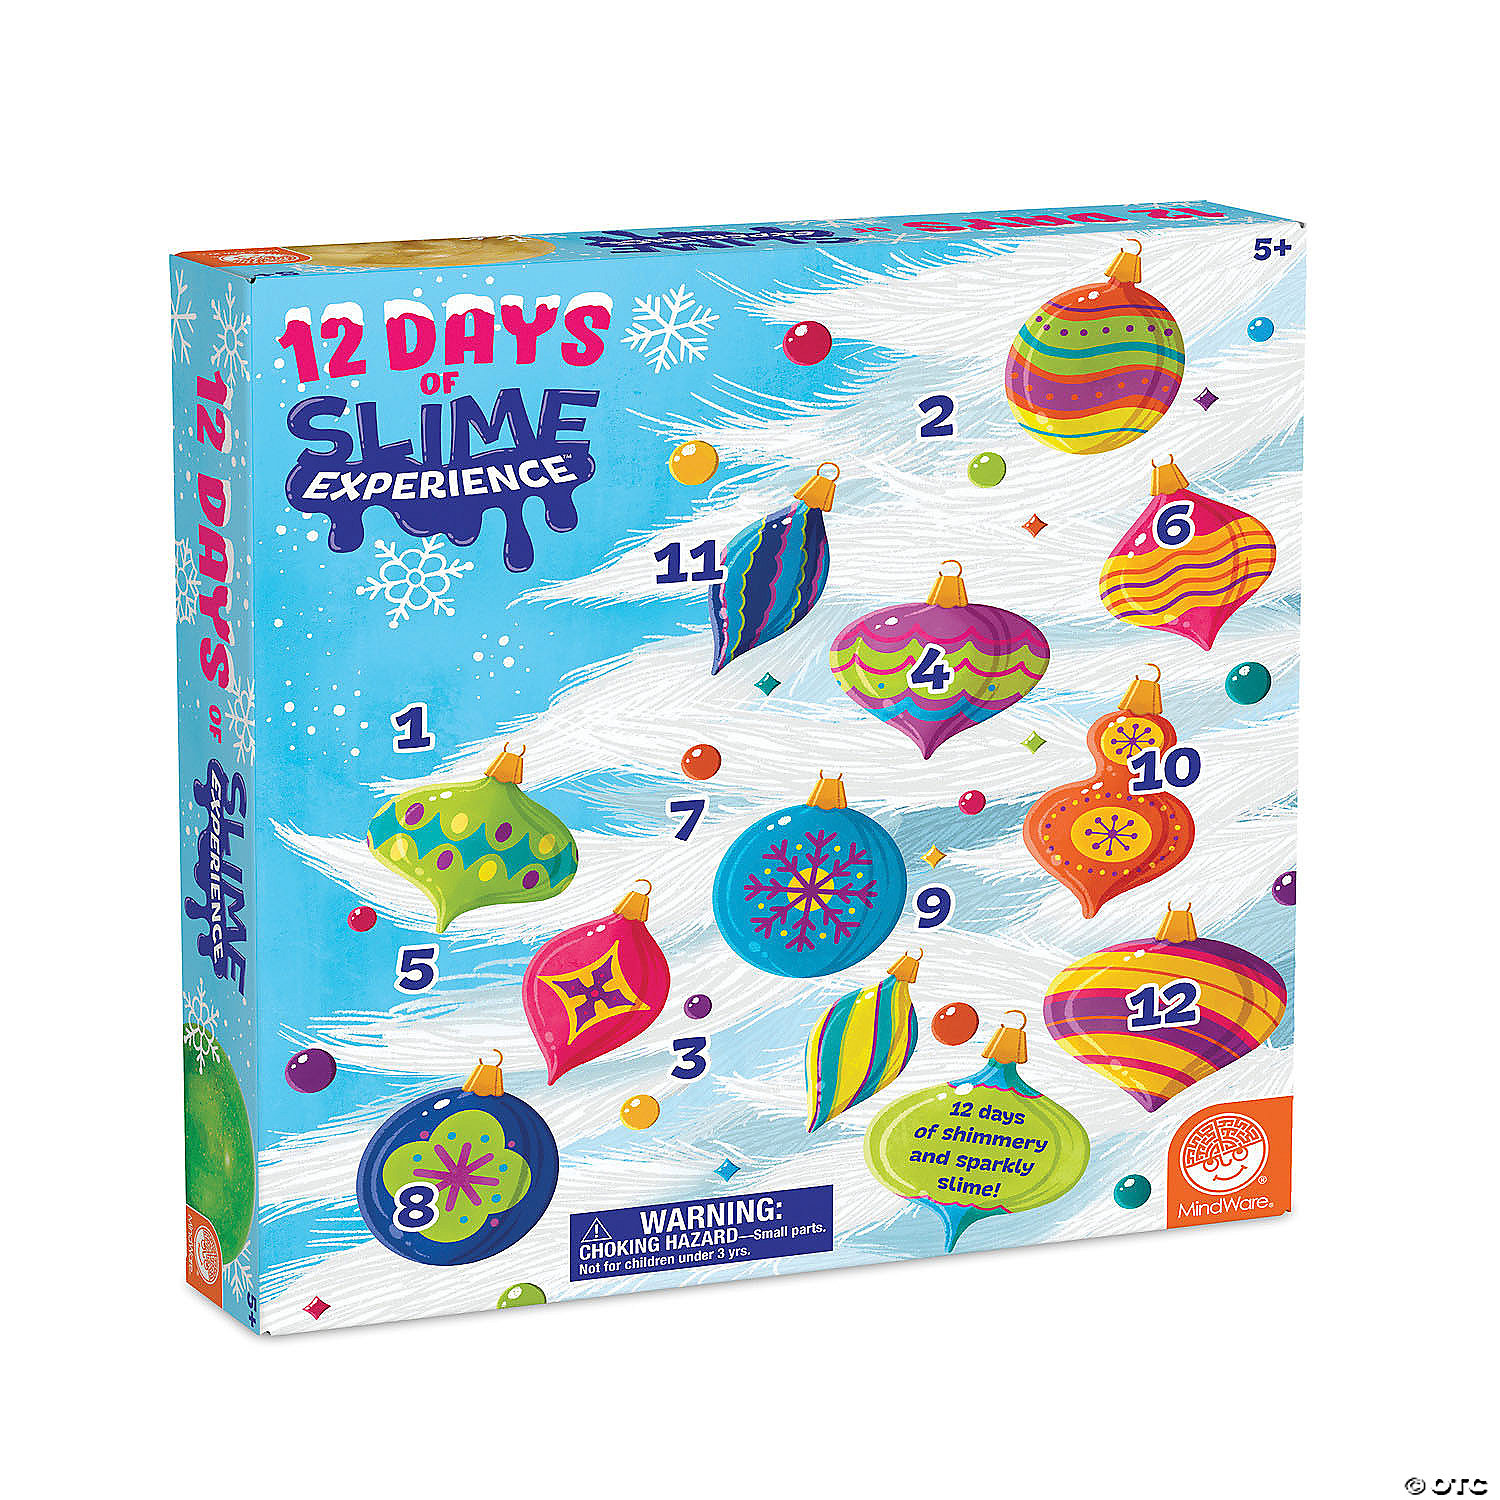 Mindware 12 Days of Slime Experience